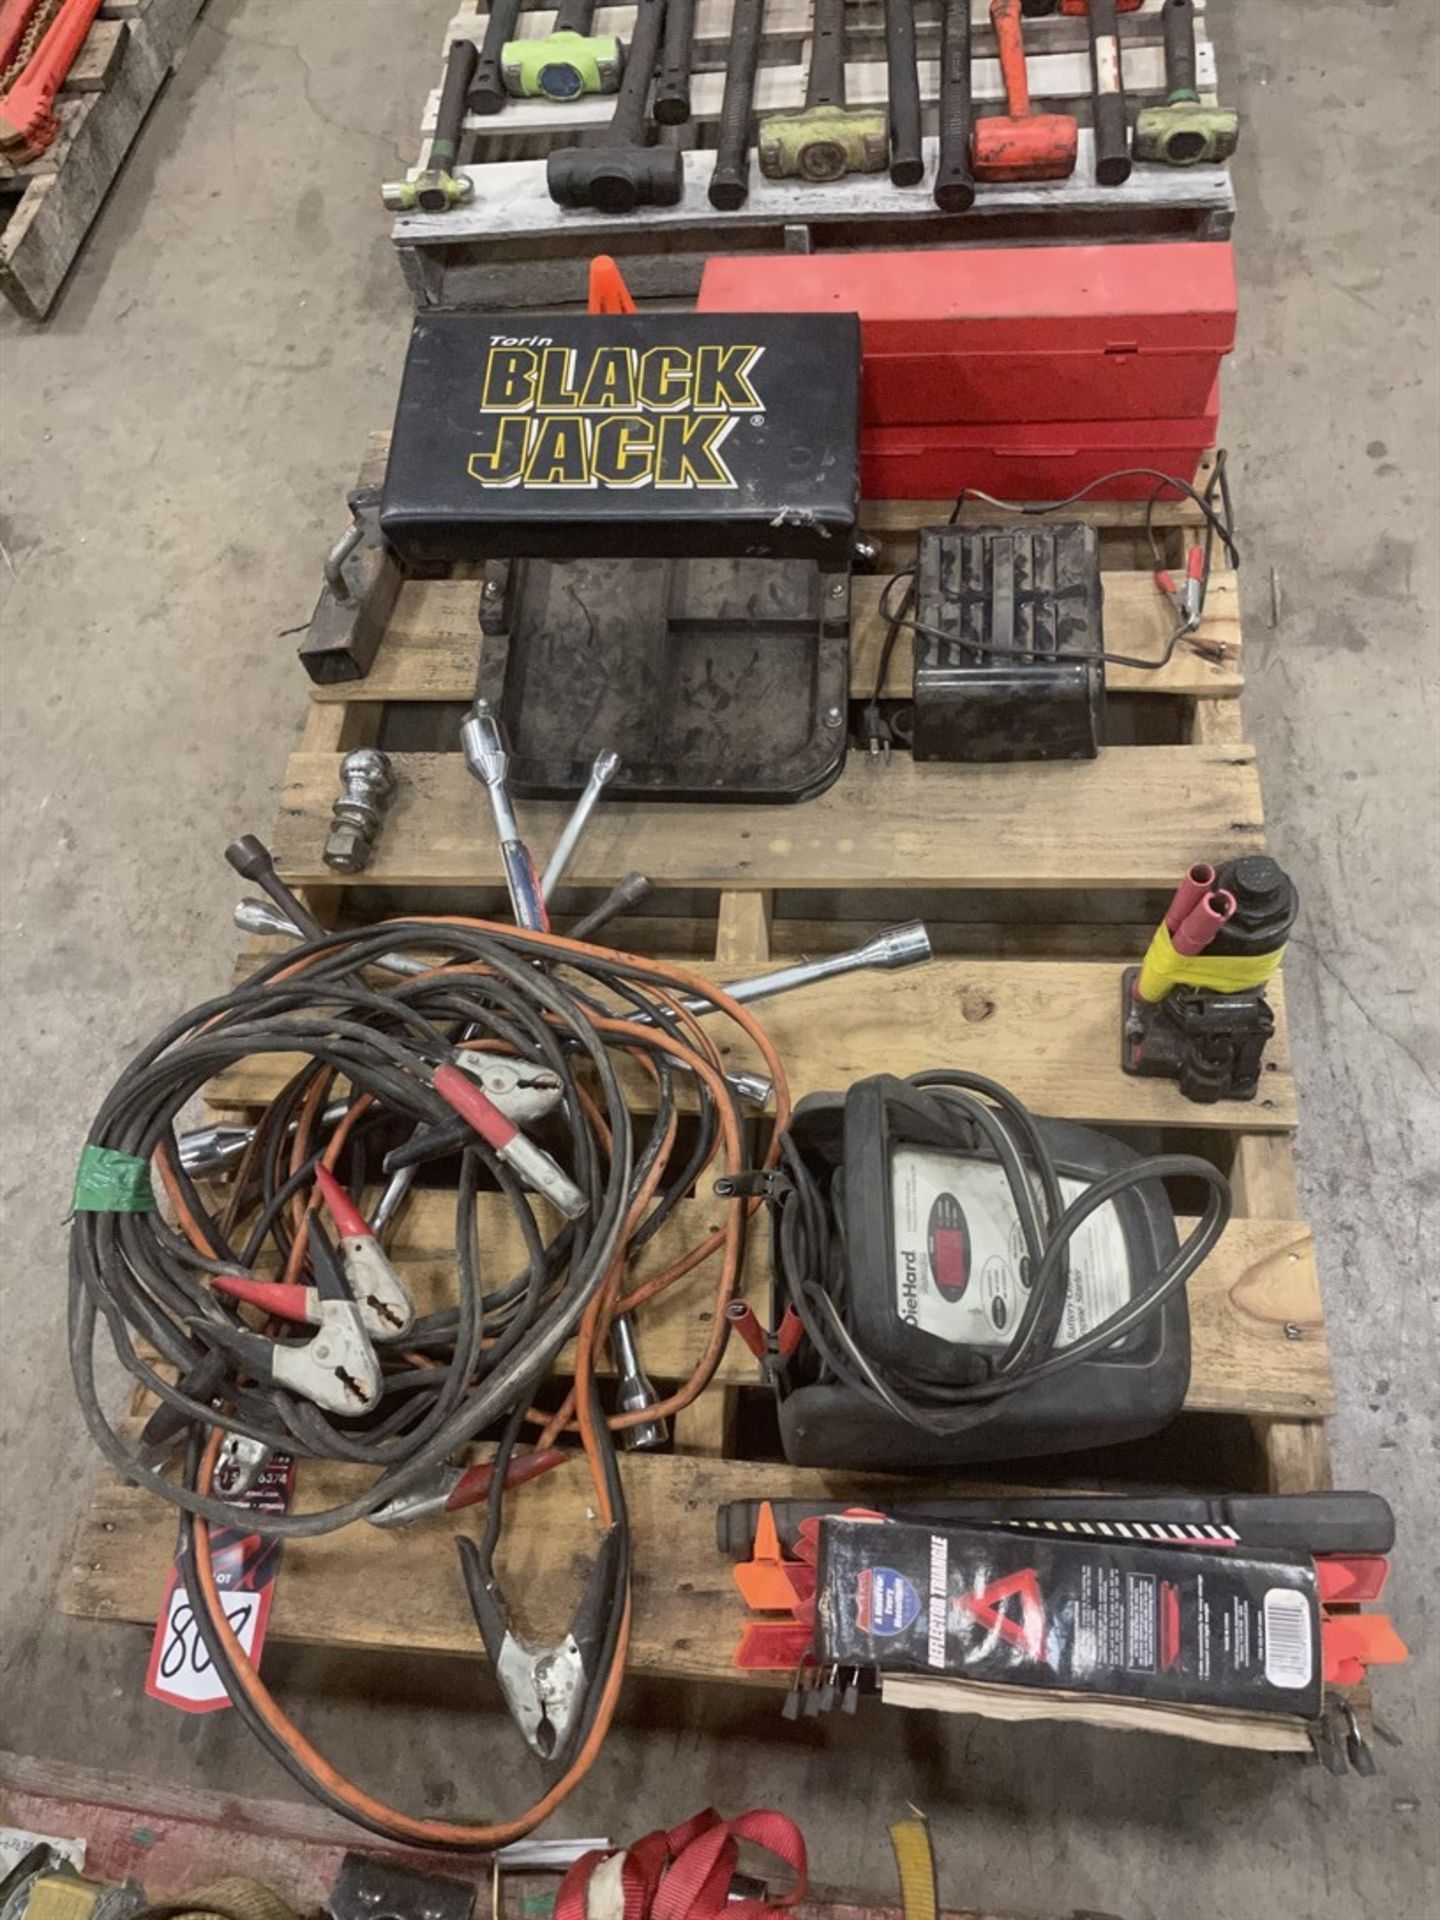 Lot Consisting of Jumper Cable, Battery Chargers, Trailer Hitches, Bottle Jacks and Safety Kits